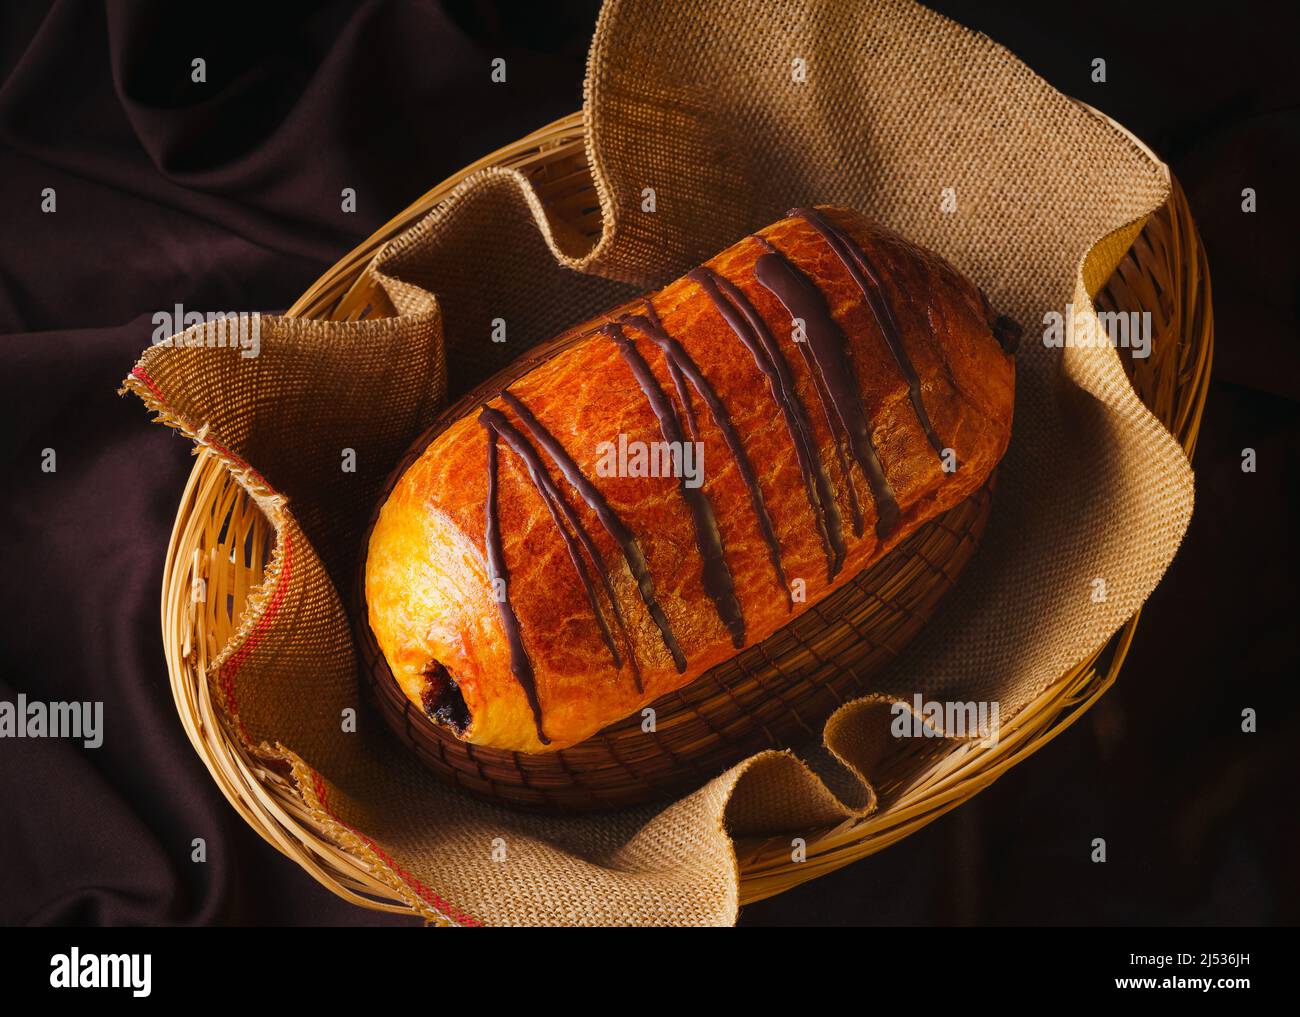 Homemade bread filled with jam with melted chocolate in a wooden basket with rustic black background, gourmet bakery. Traditional Mexican sweet bread. Stock Photo